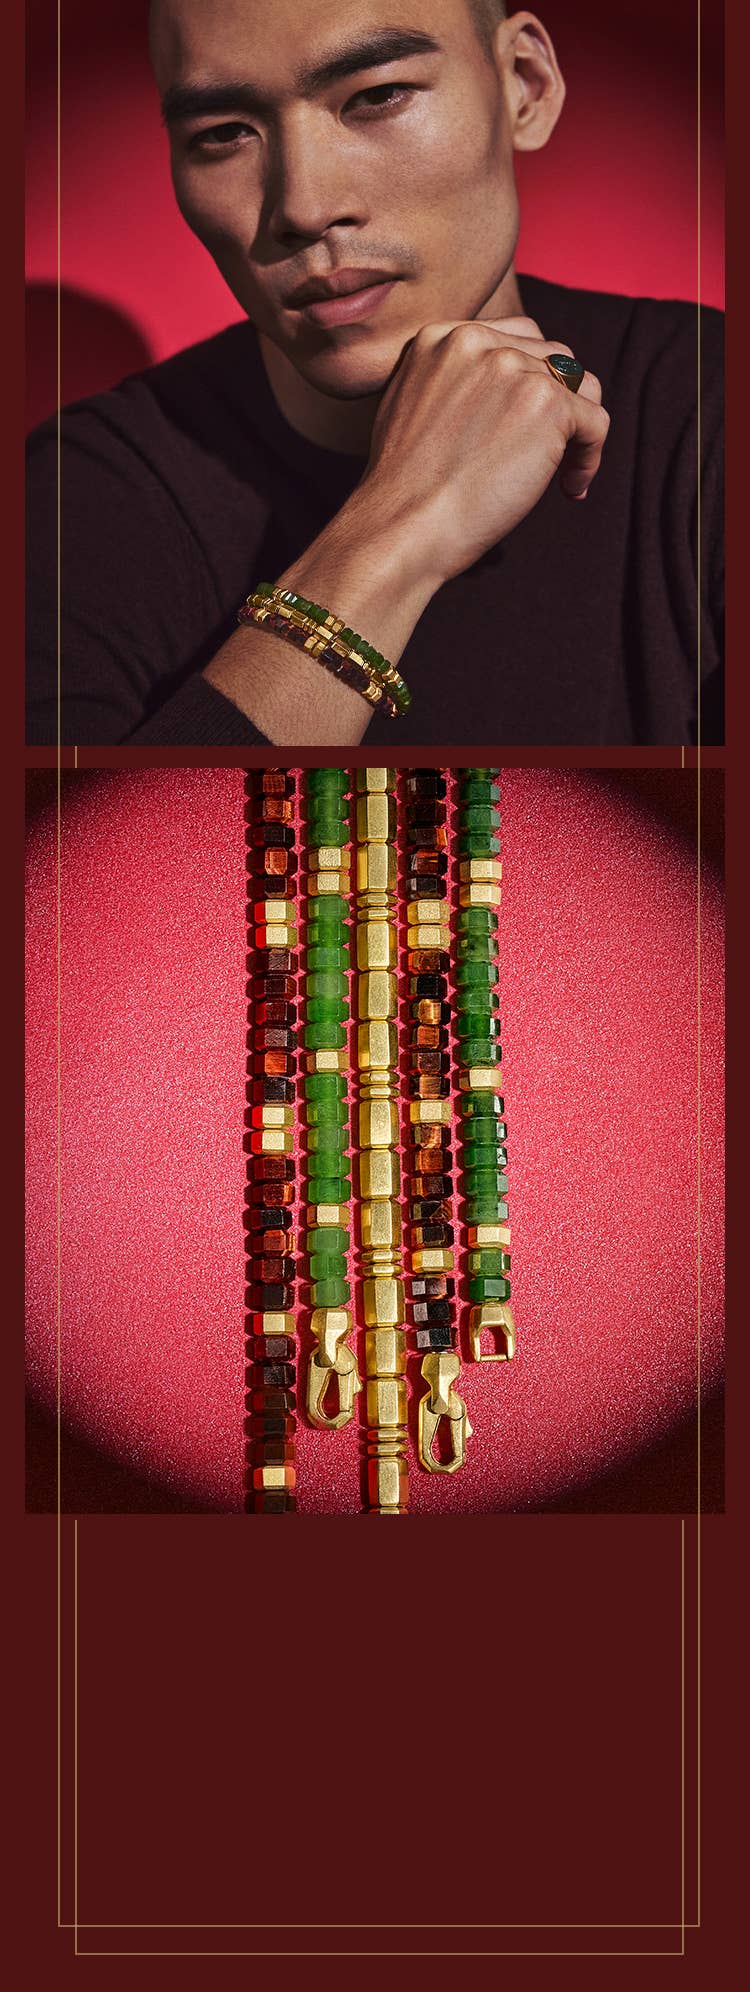 An image of a hex red, green and gold bracelets and a male model wearing them..